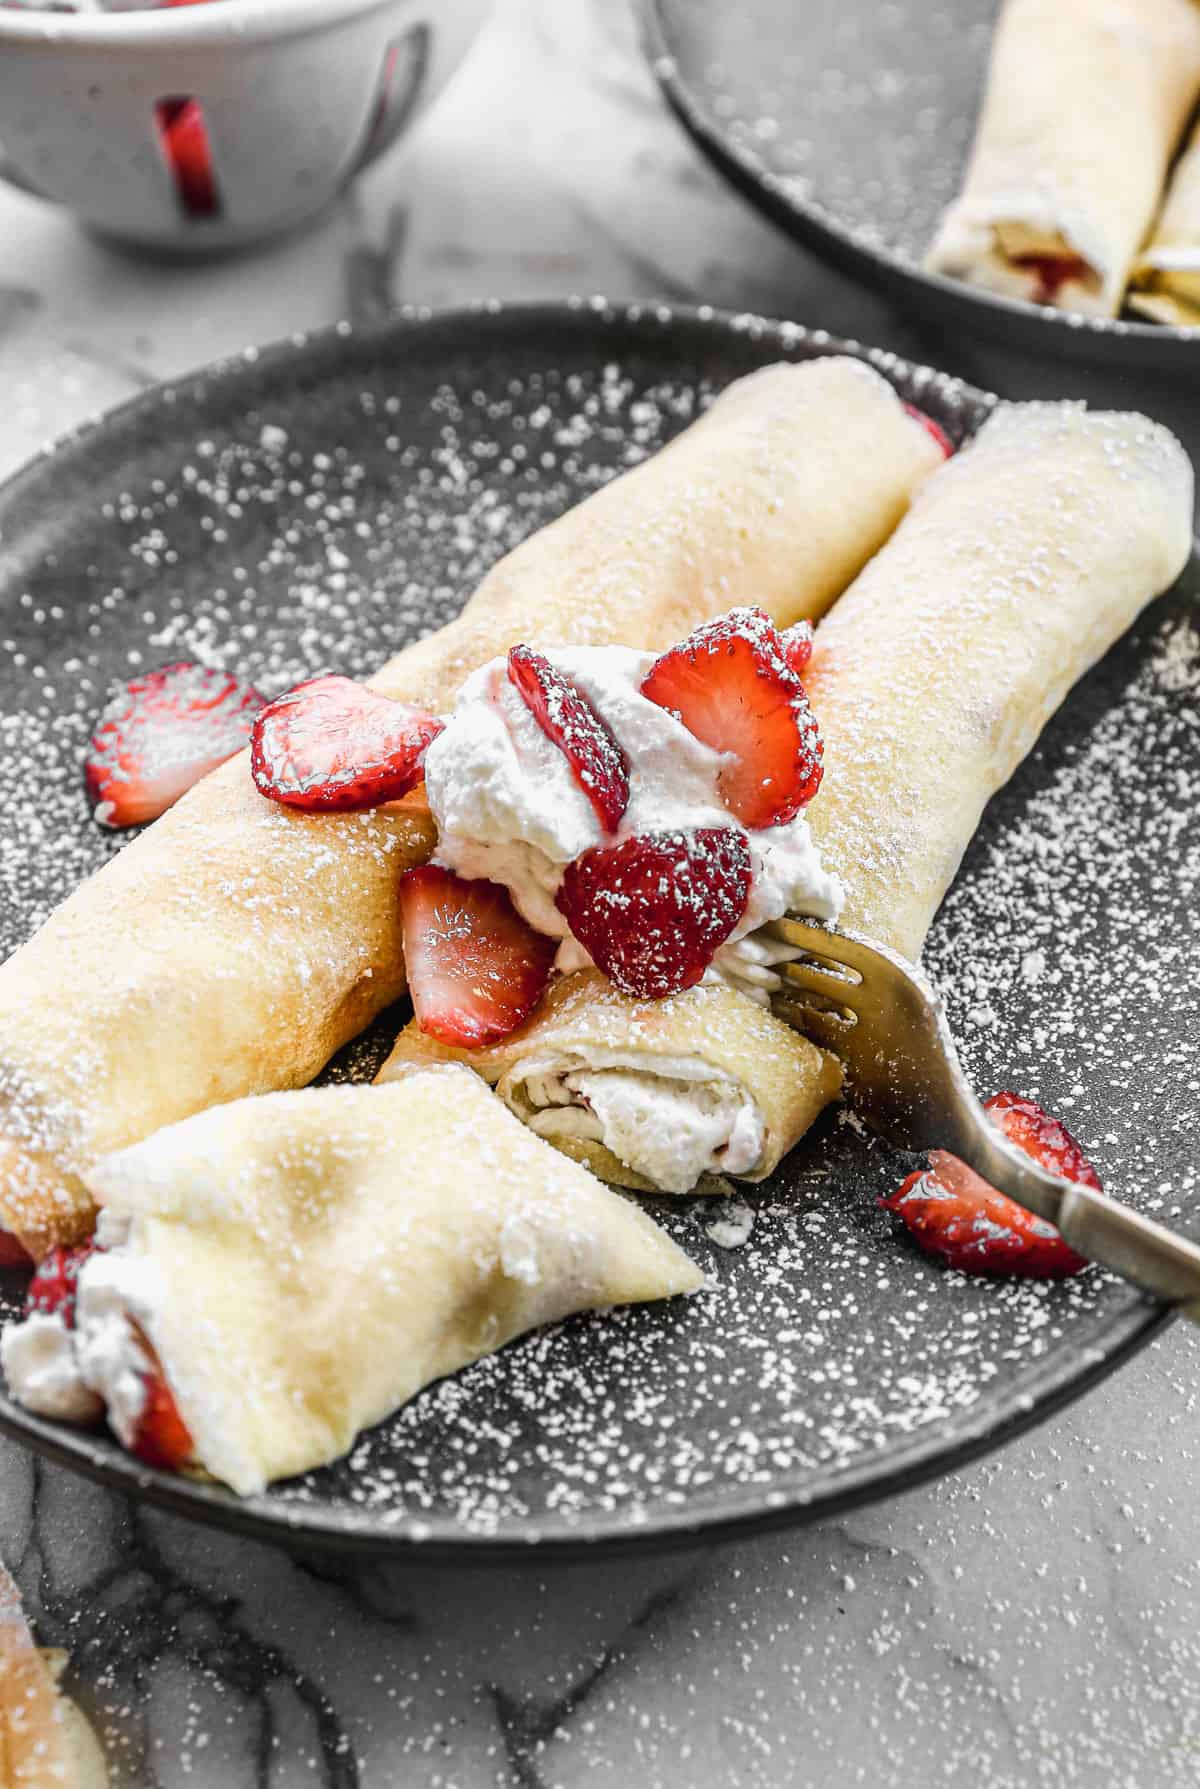 A close up image of a fork cutting into an easy Strawberry Crepe topped with whipped cream, powdered sugar, and strawberries.